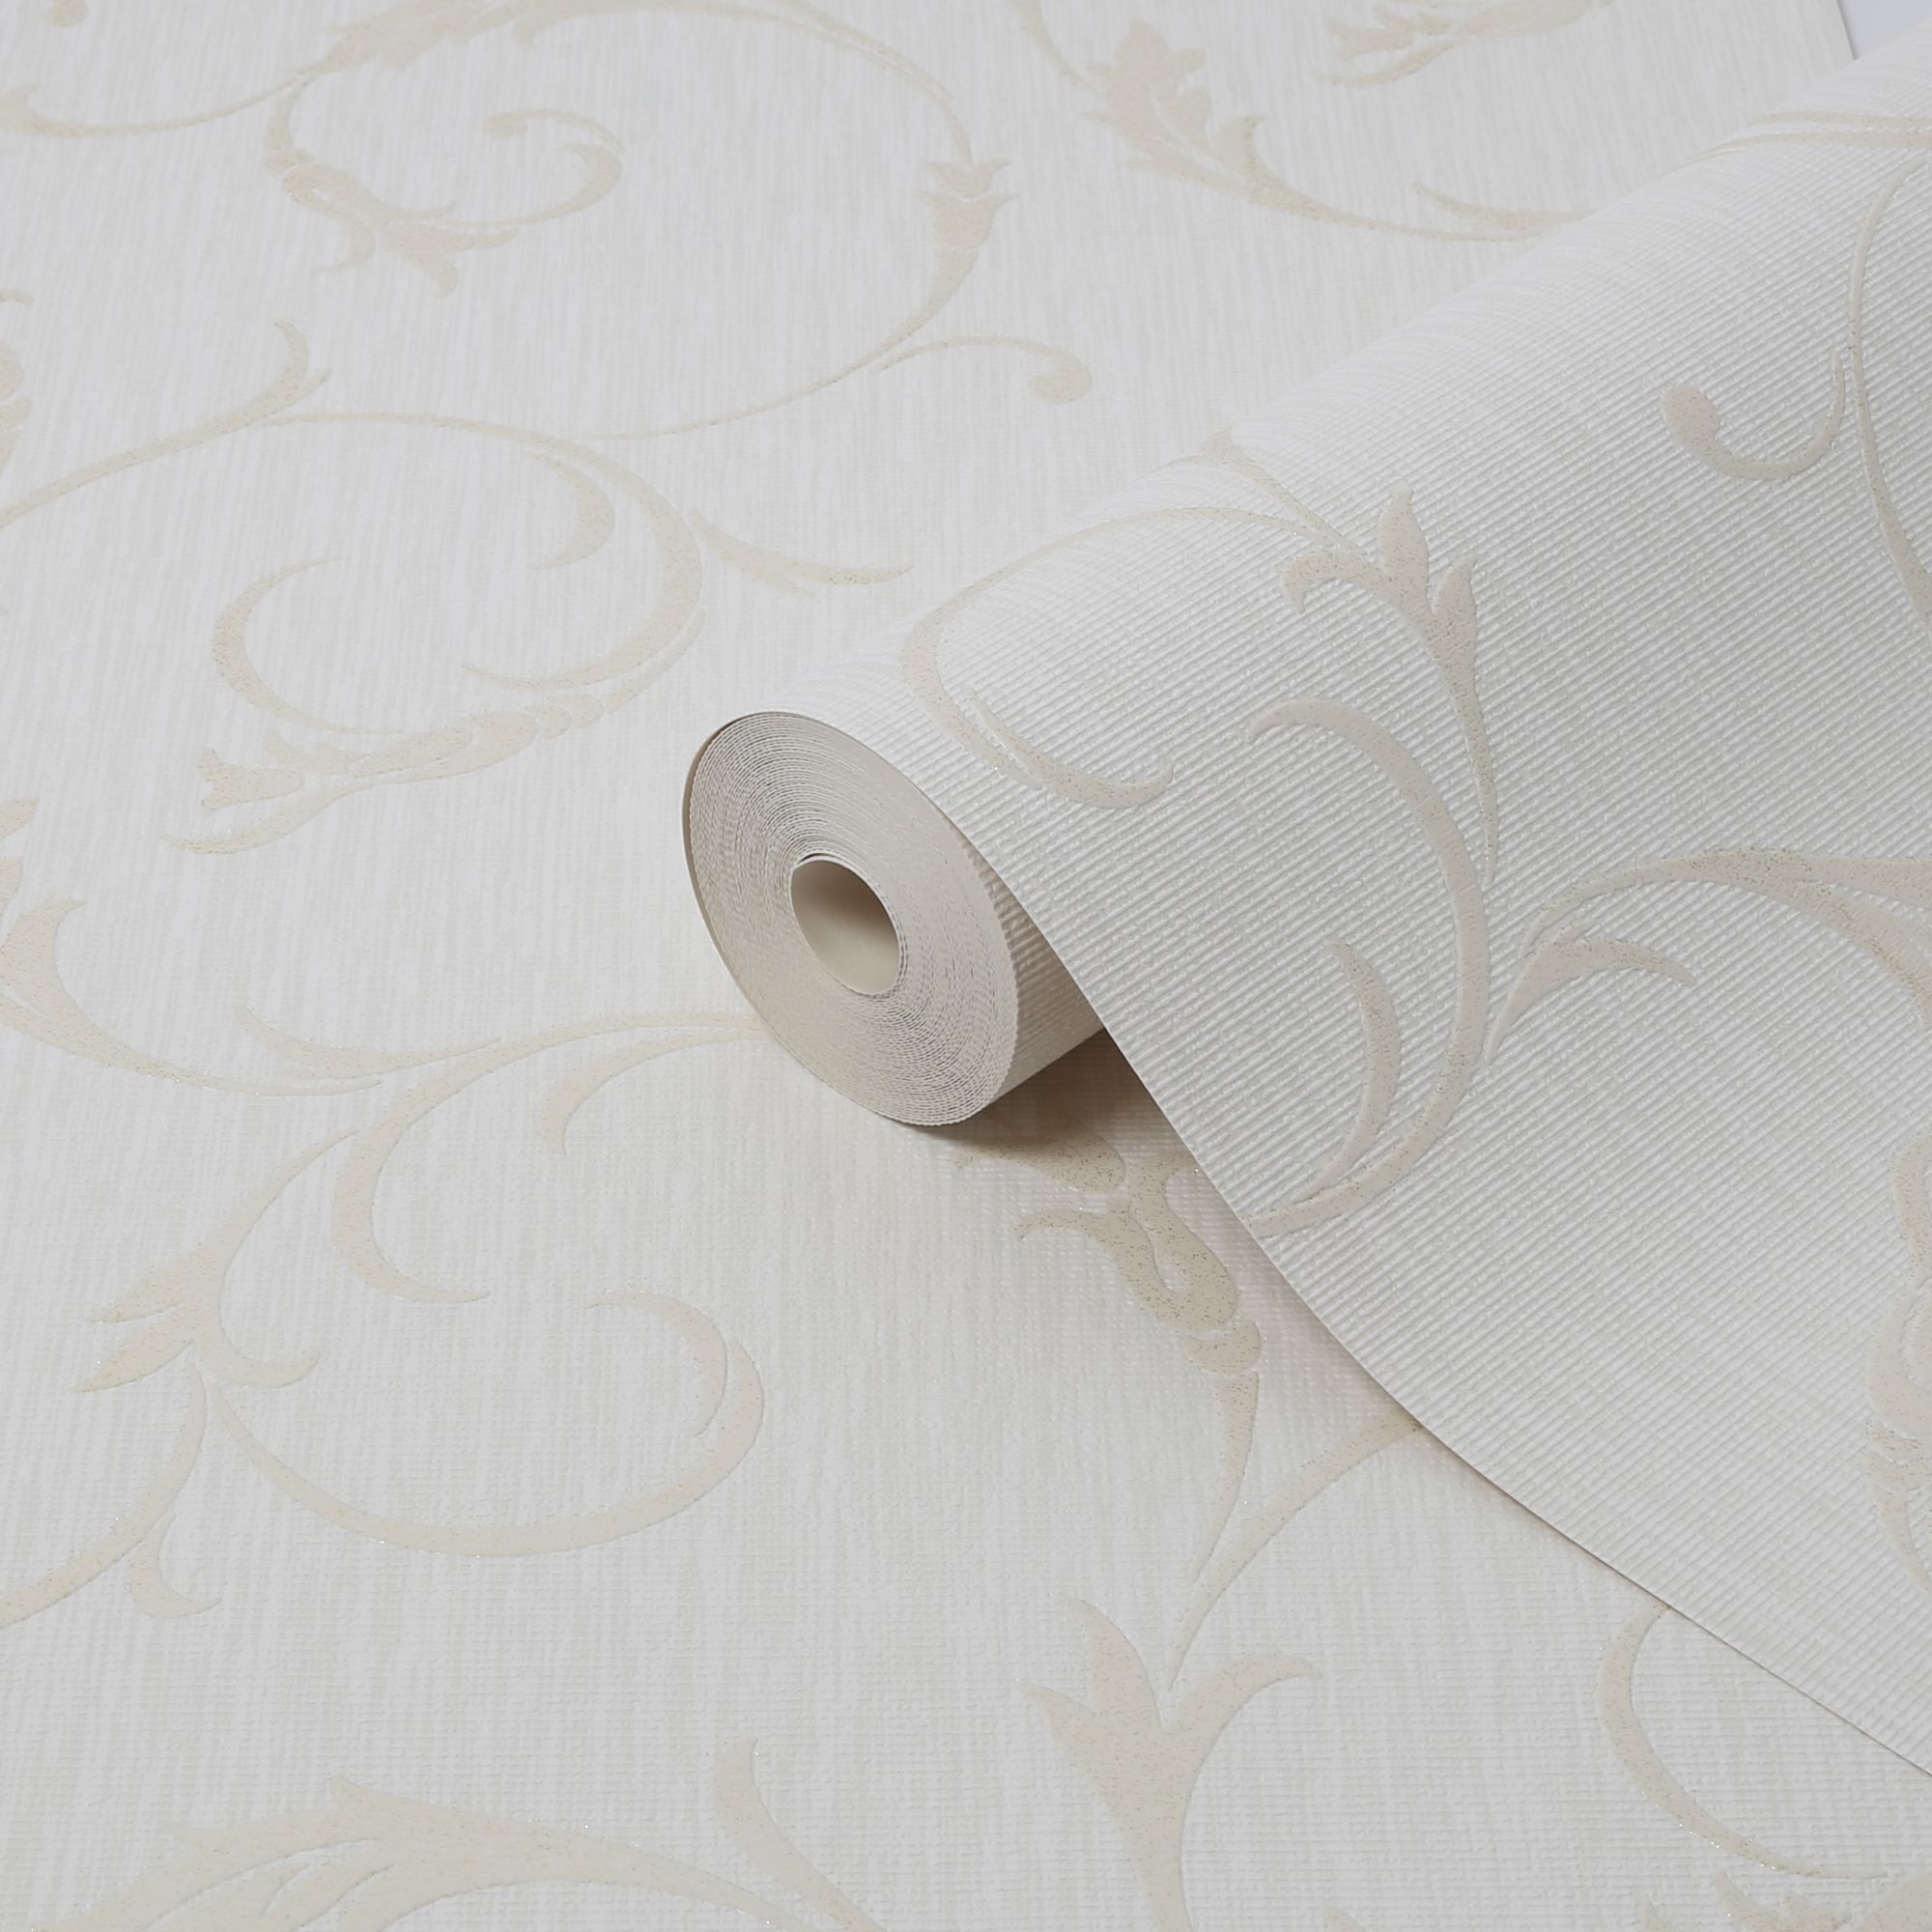 Gold & White Damask Scroll Vinyl Contact Paper Shelf Liner